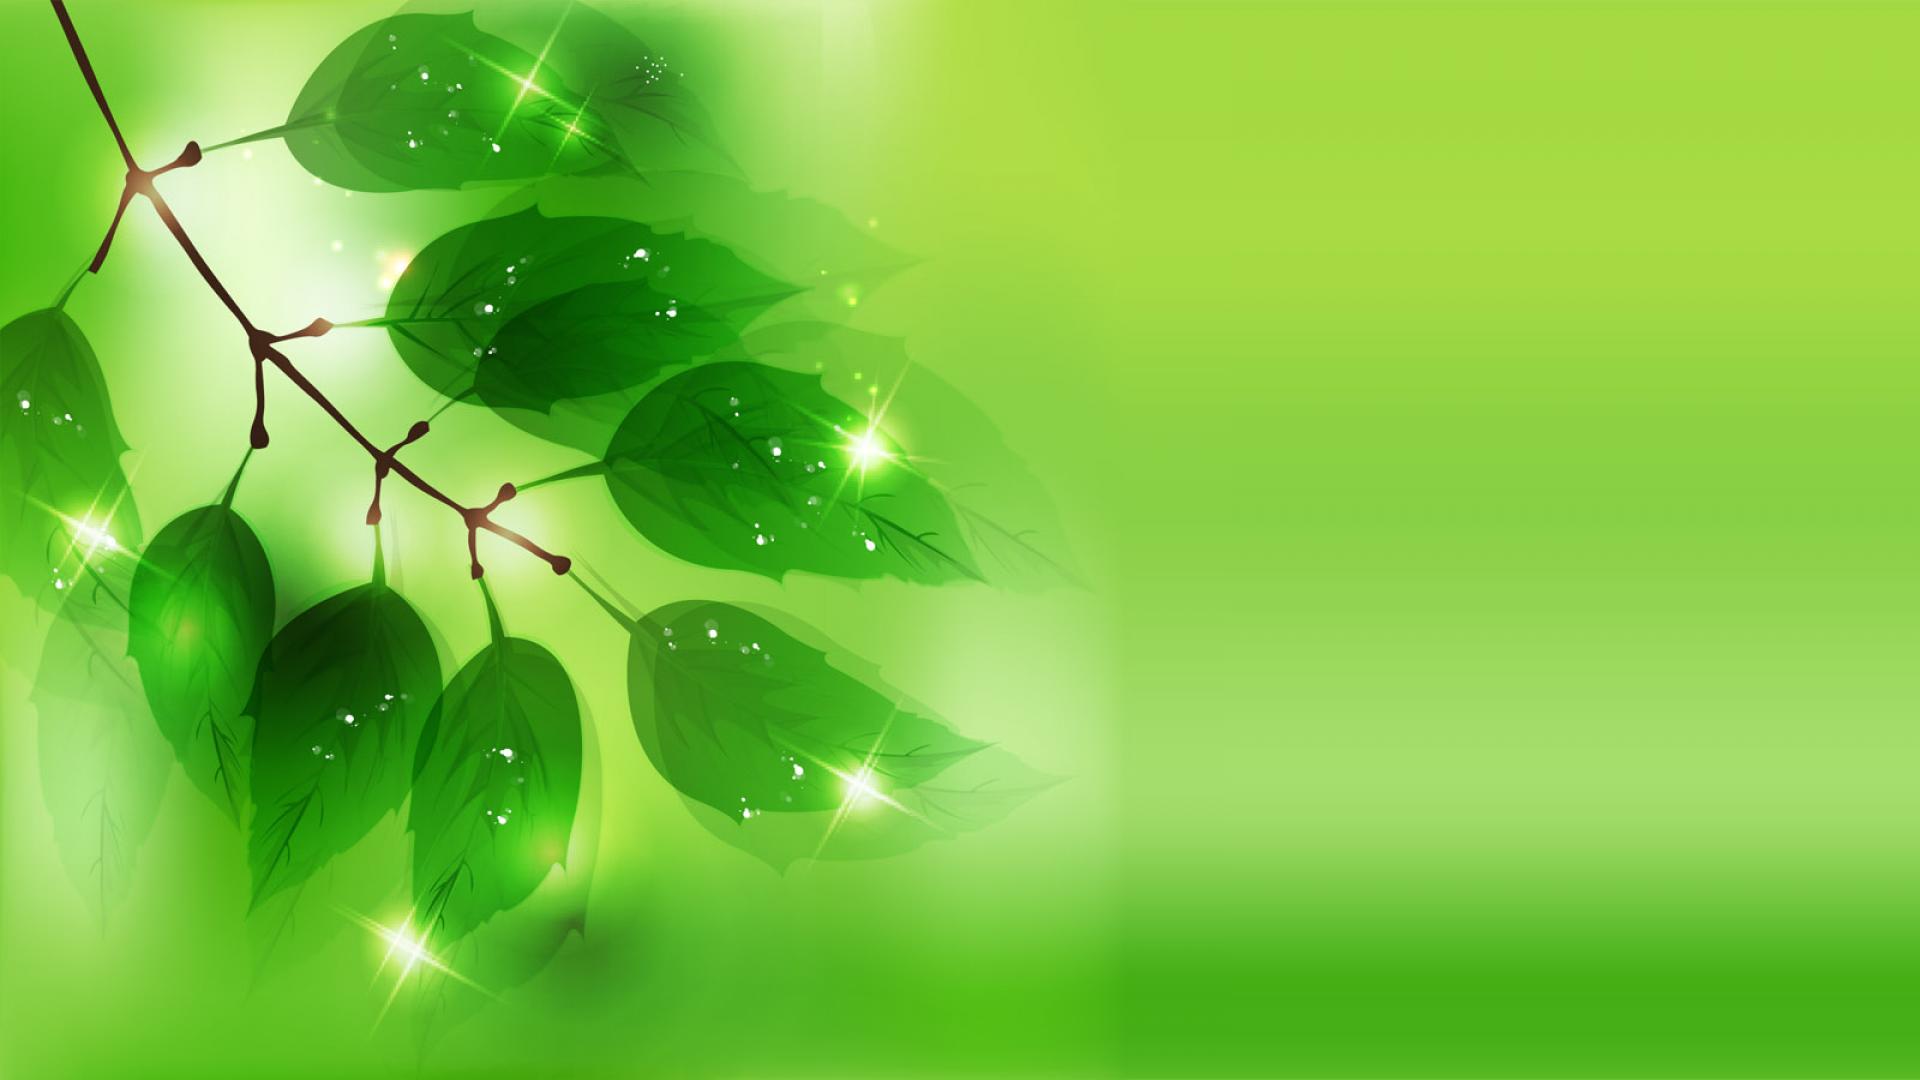 45 Hd Green Wallpapers Backgrounds For Free Download